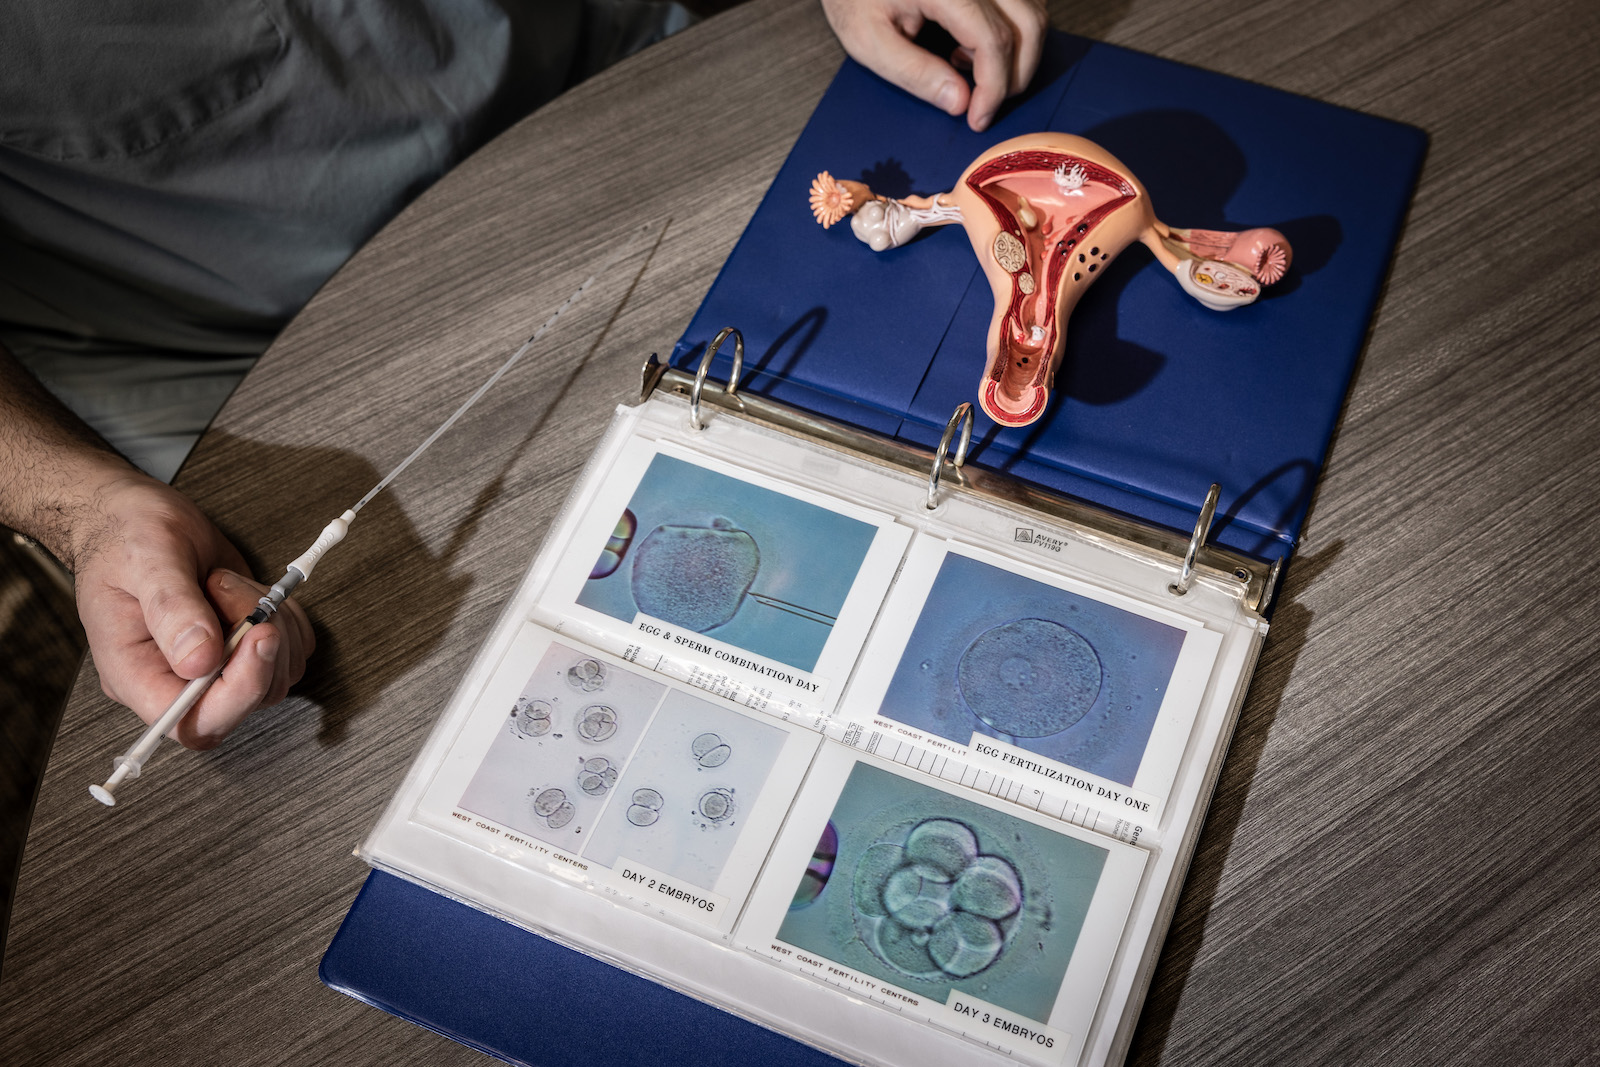 a binder full of photos of embryos and a plastic uterus model